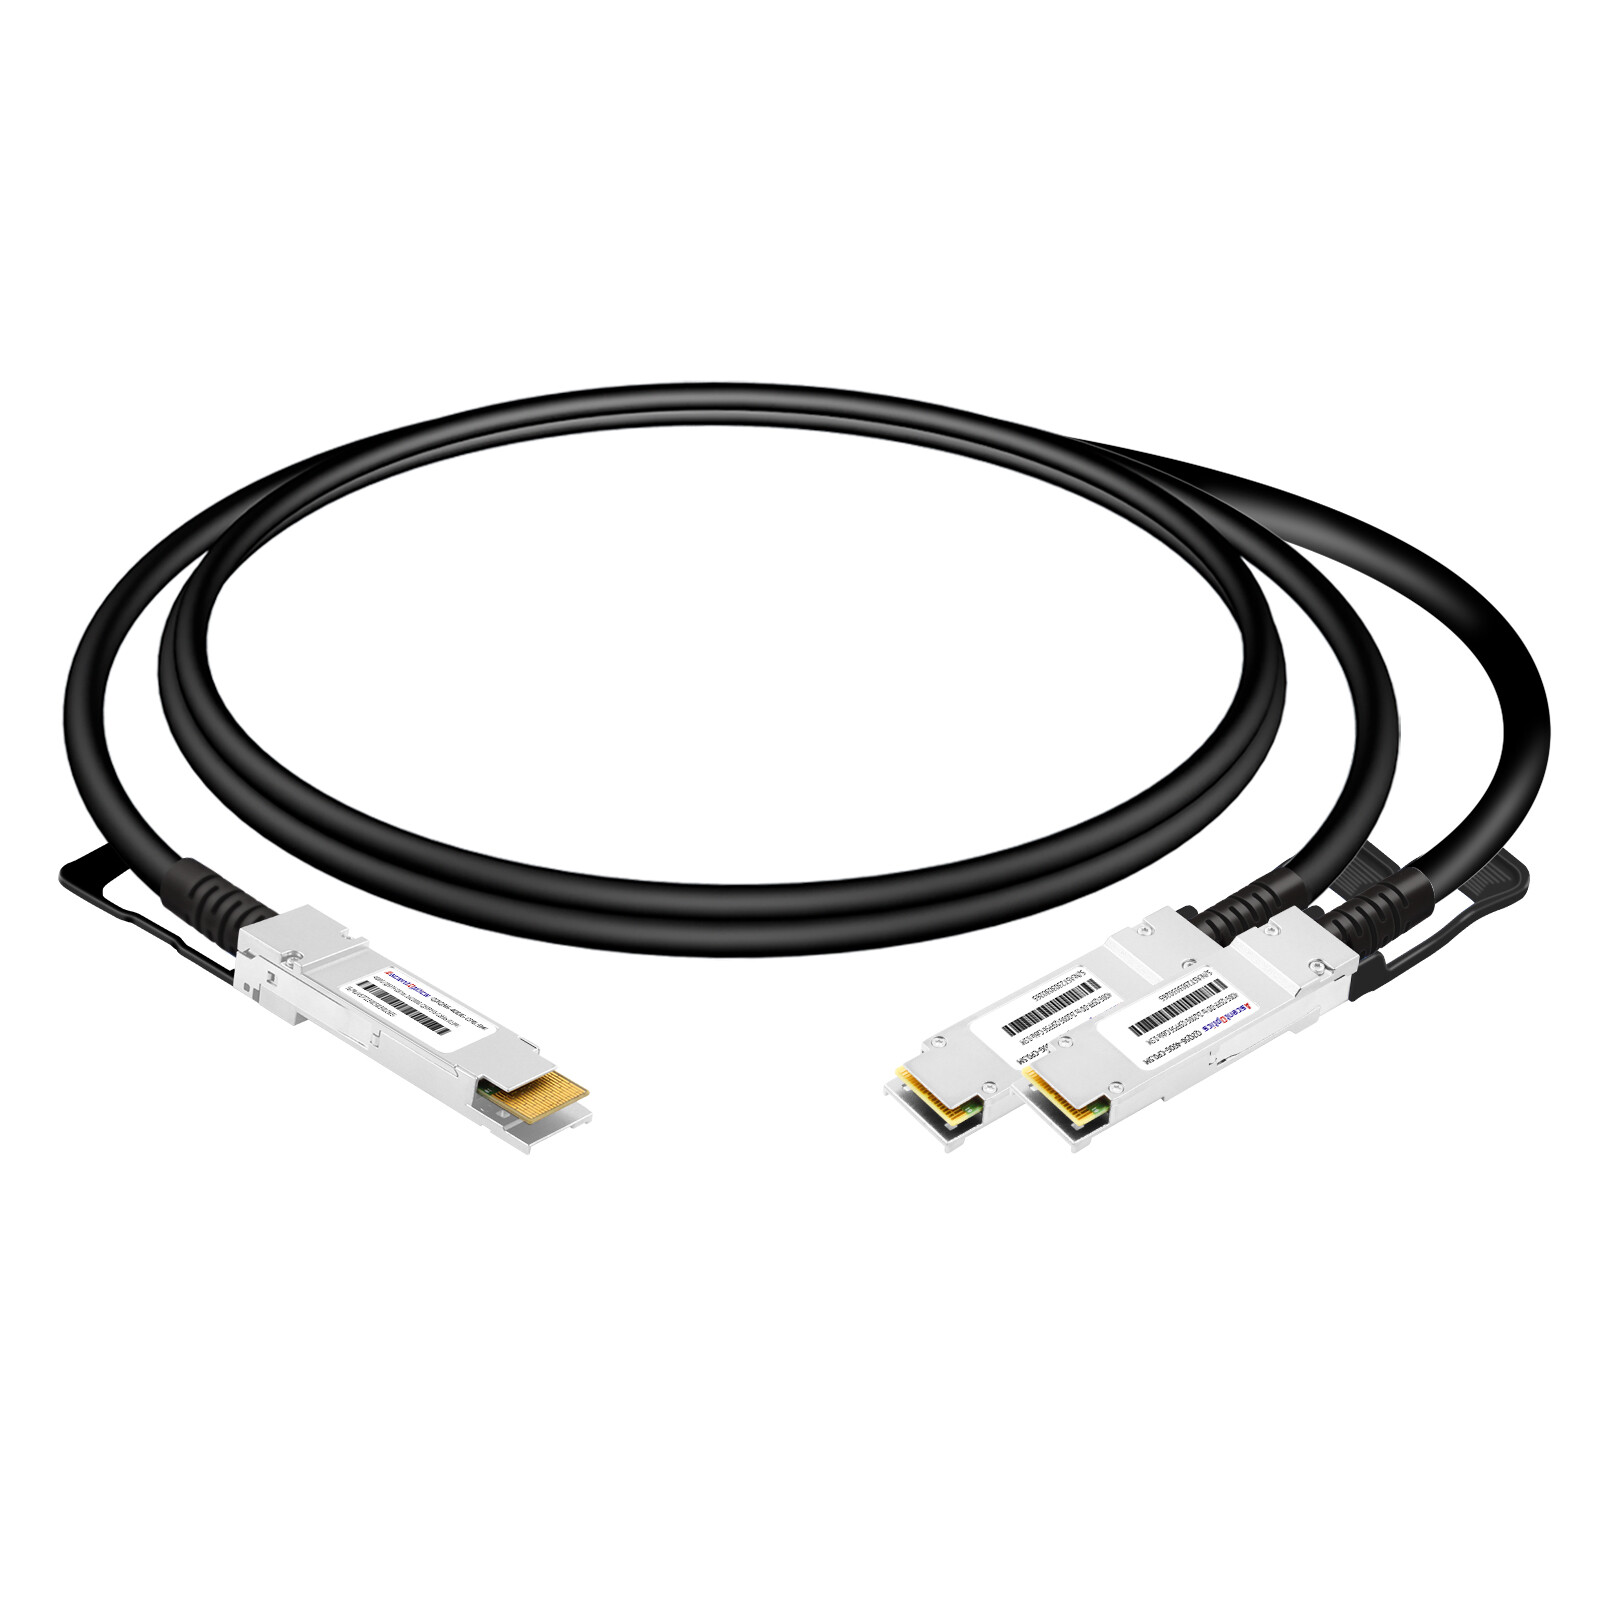 400G QSFP-DD to 2x 200G QSFP-DD  Copper Breakout Cable,2 Meter,Passive